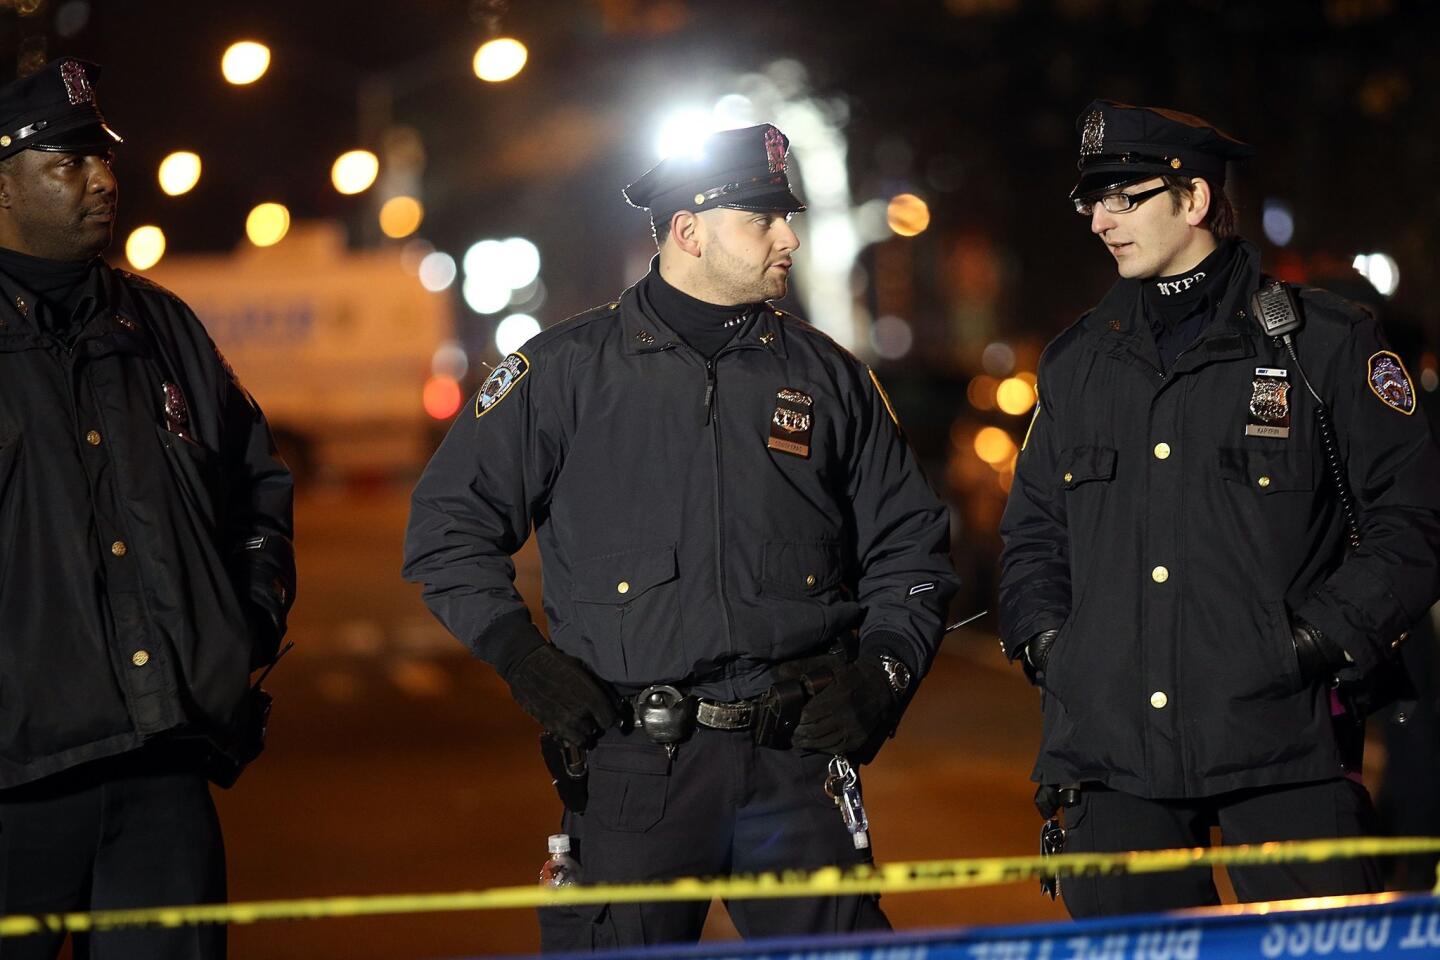 NYPD officers fatally shot